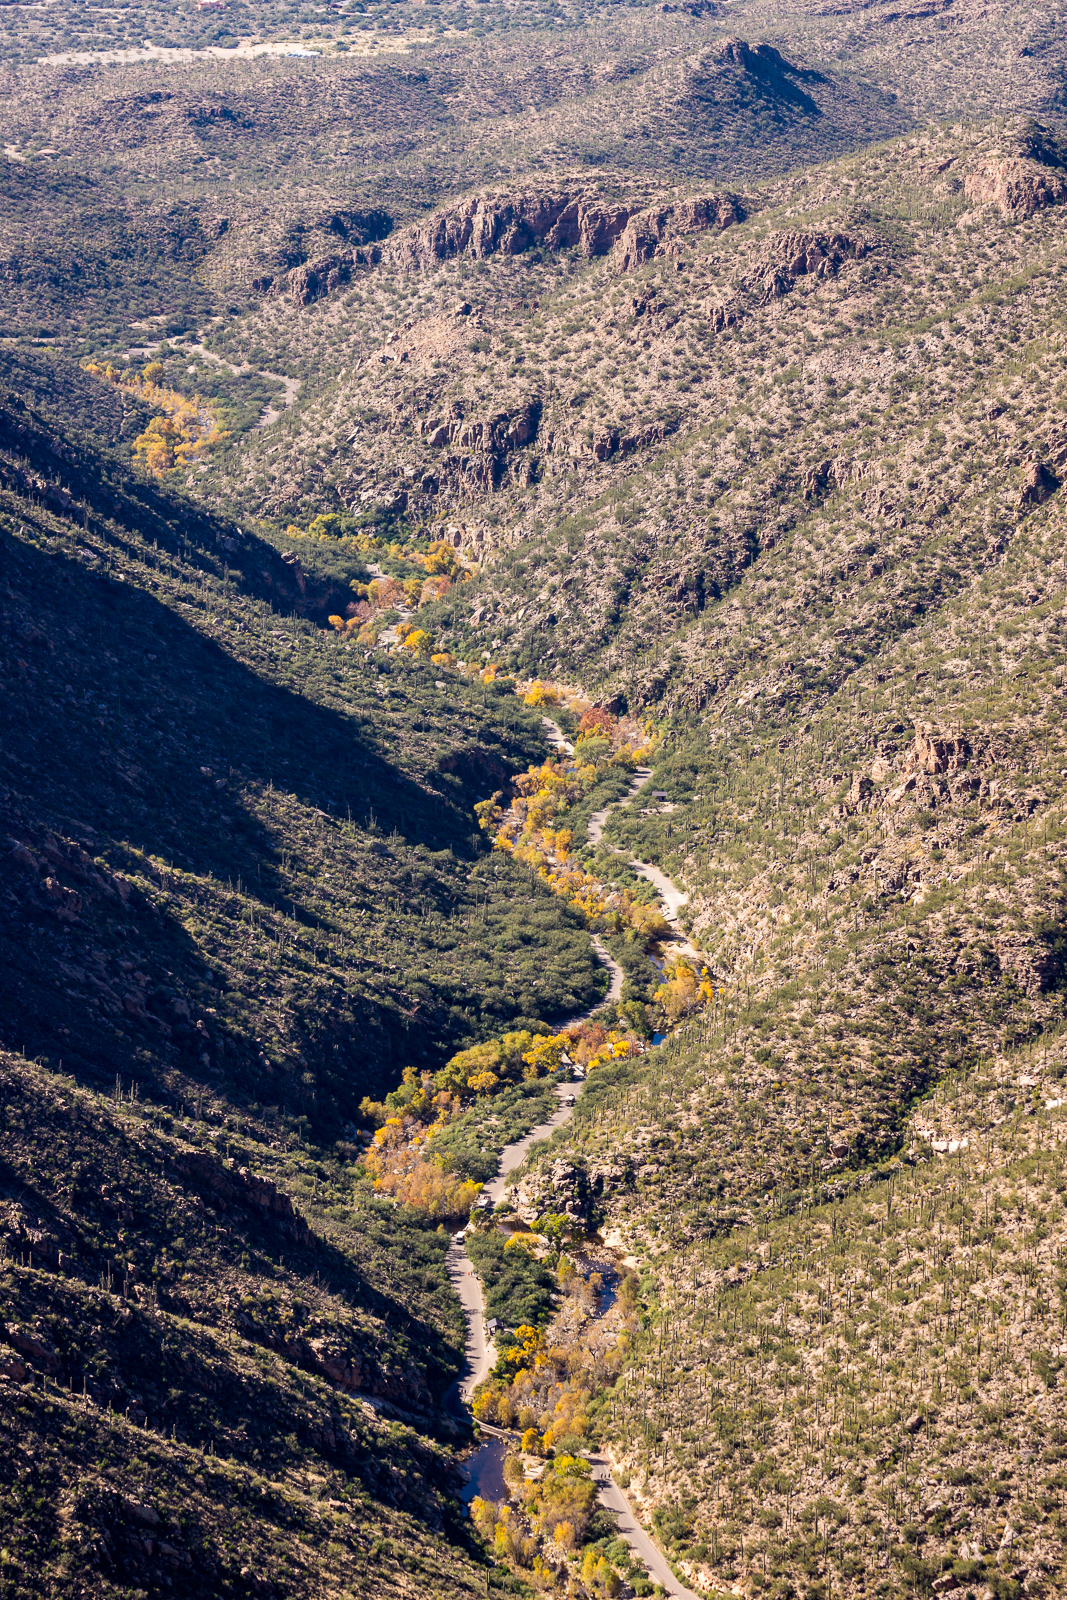 Looking down Sabino Canyon, a ribbon of color in the desert - from just below the base of Thimble Peak. November 2015.